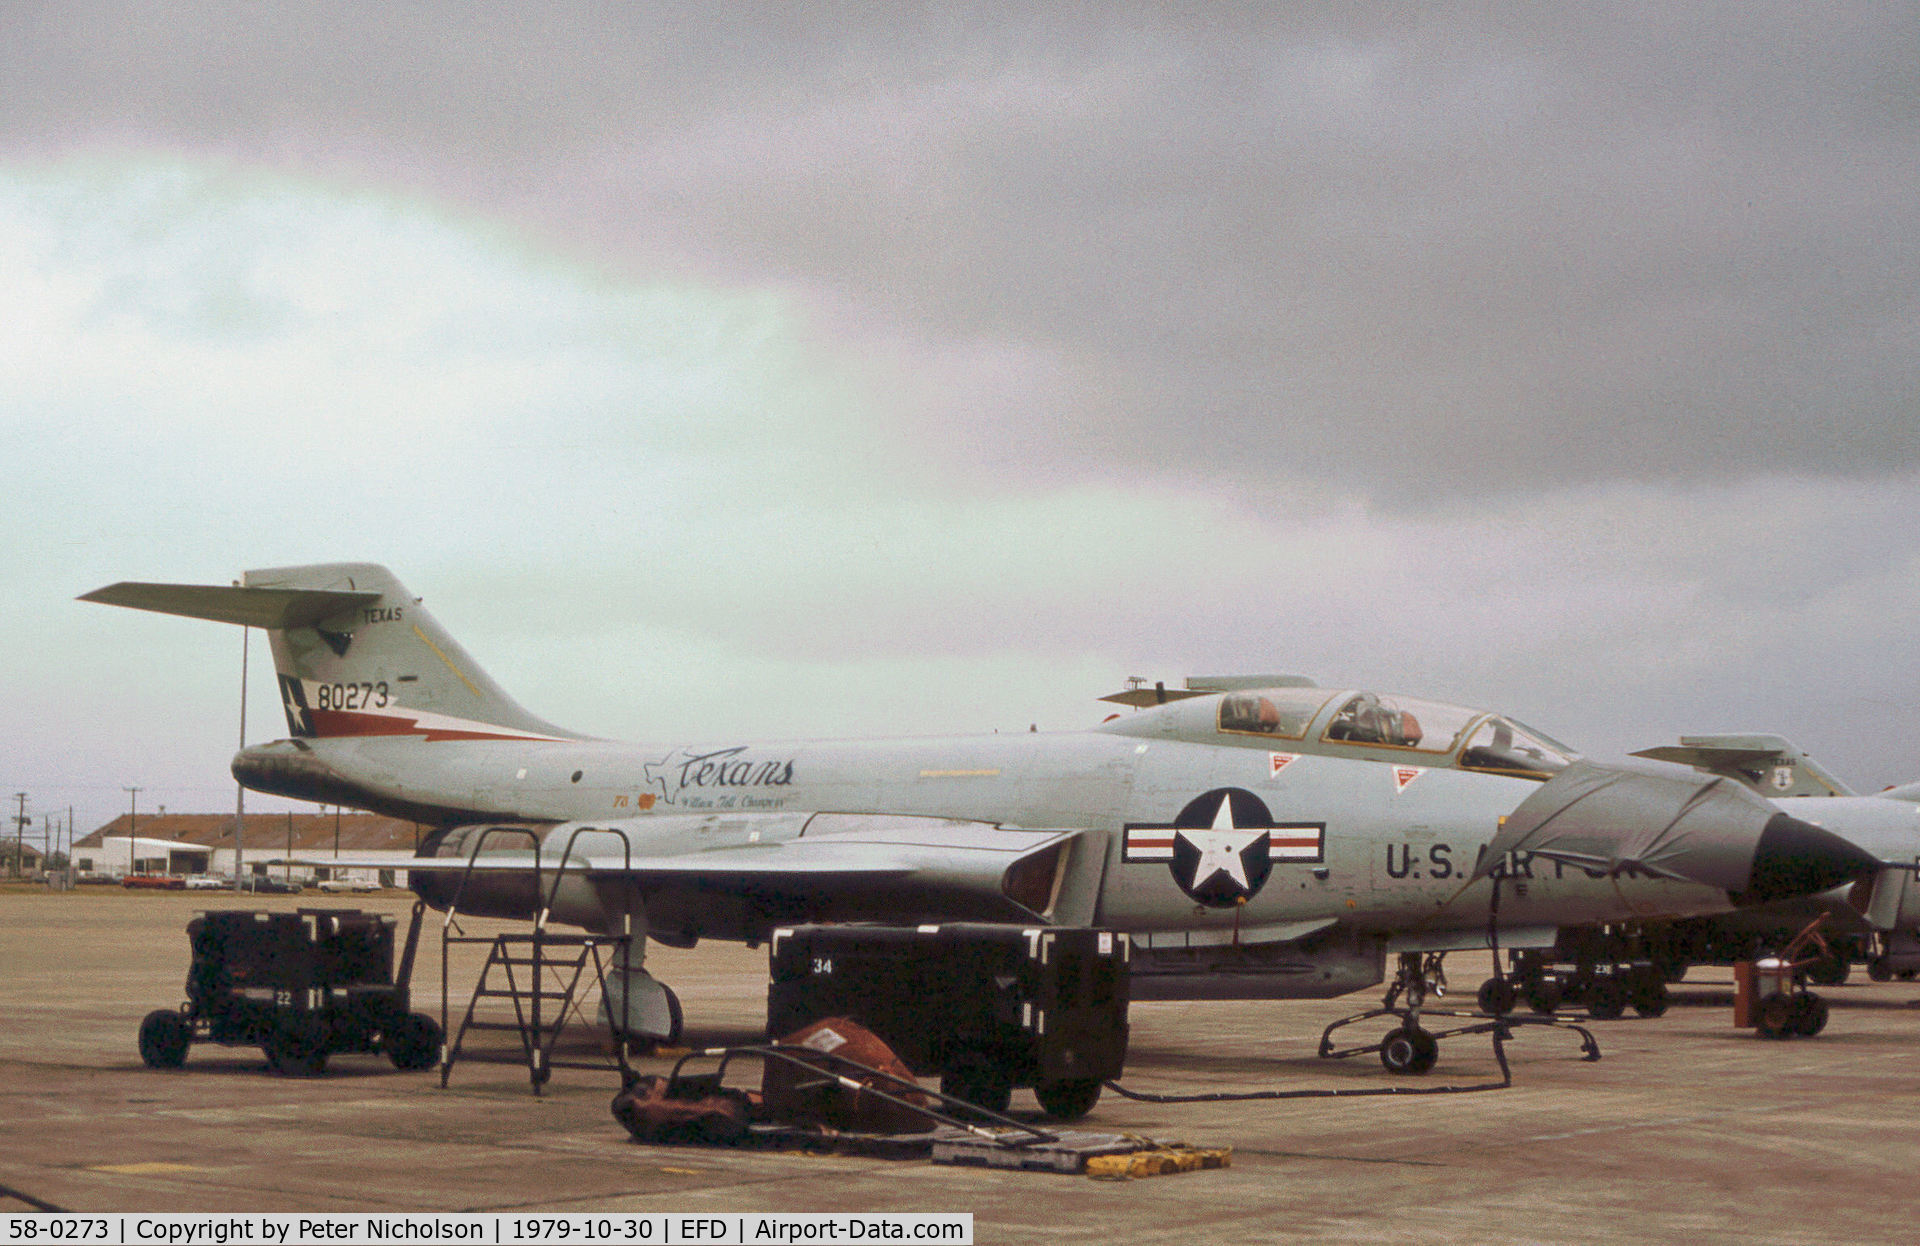 58-0273, 1958 McDonnell F-101B Voodoo C/N 645, Another view of this 111st Fighter Interceptor Squadron F-101B Voodoo on the flight-line at Ellington AFB in October 1979.